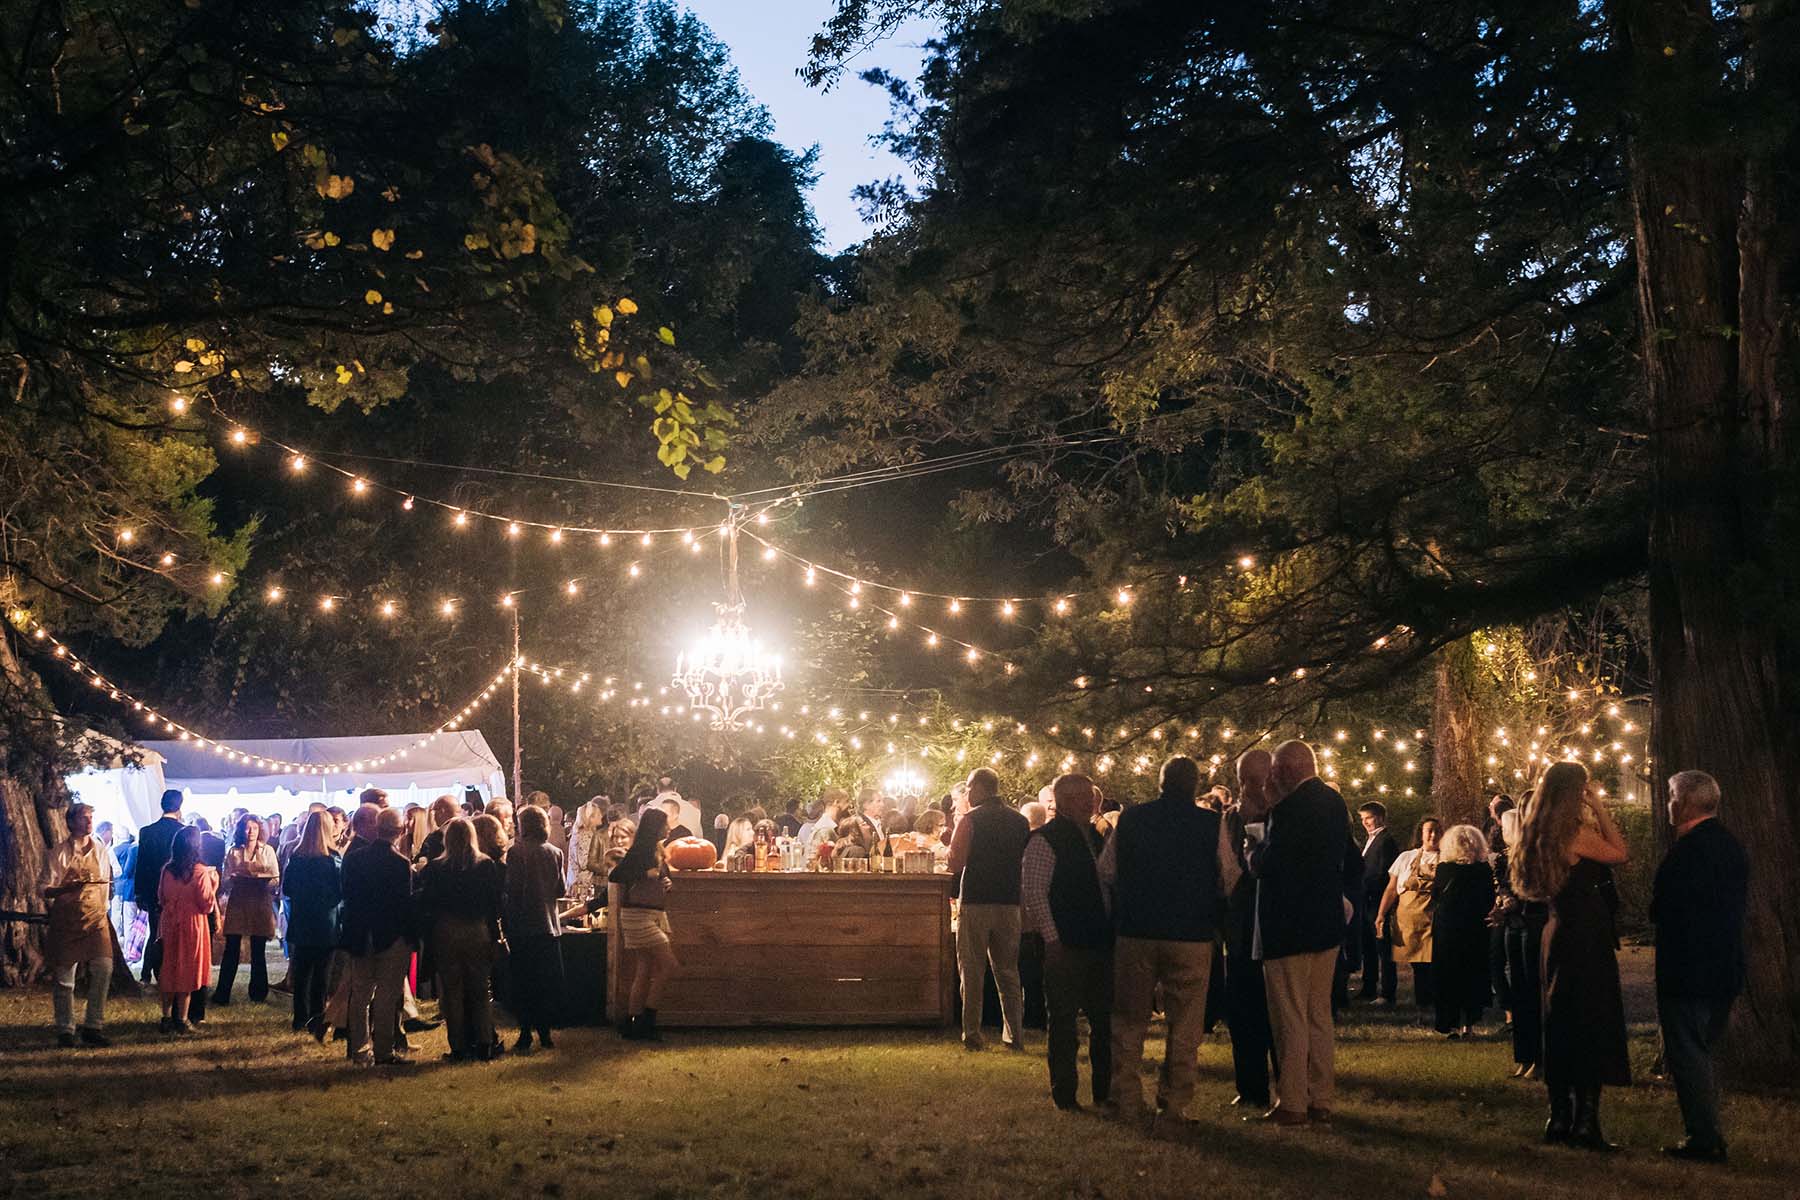 an evening image of the Harvest Supper Event